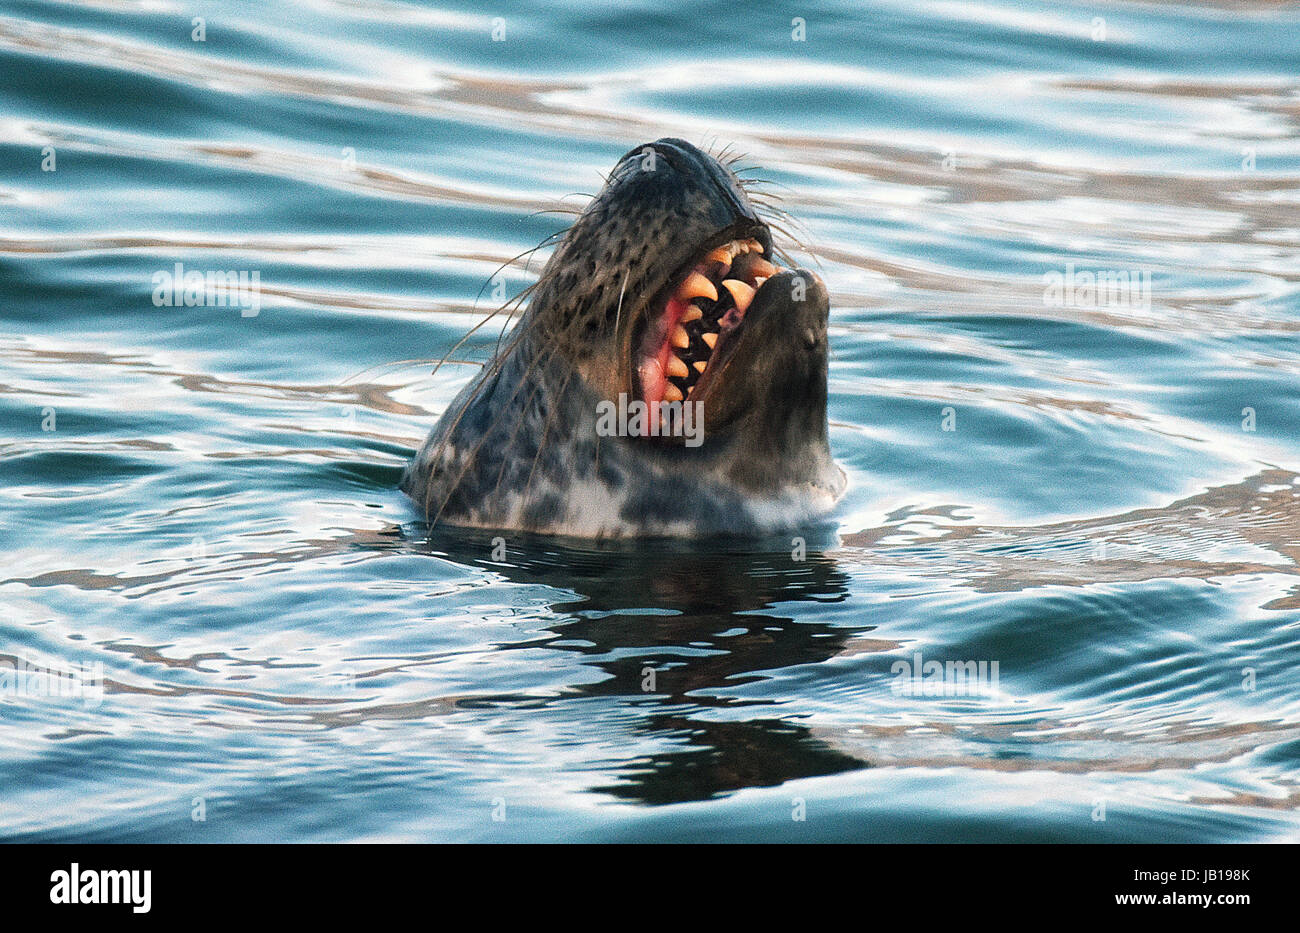 A Seal enjoys the still waters around Plymouth Hoe,Devon,UK. Stock Photo